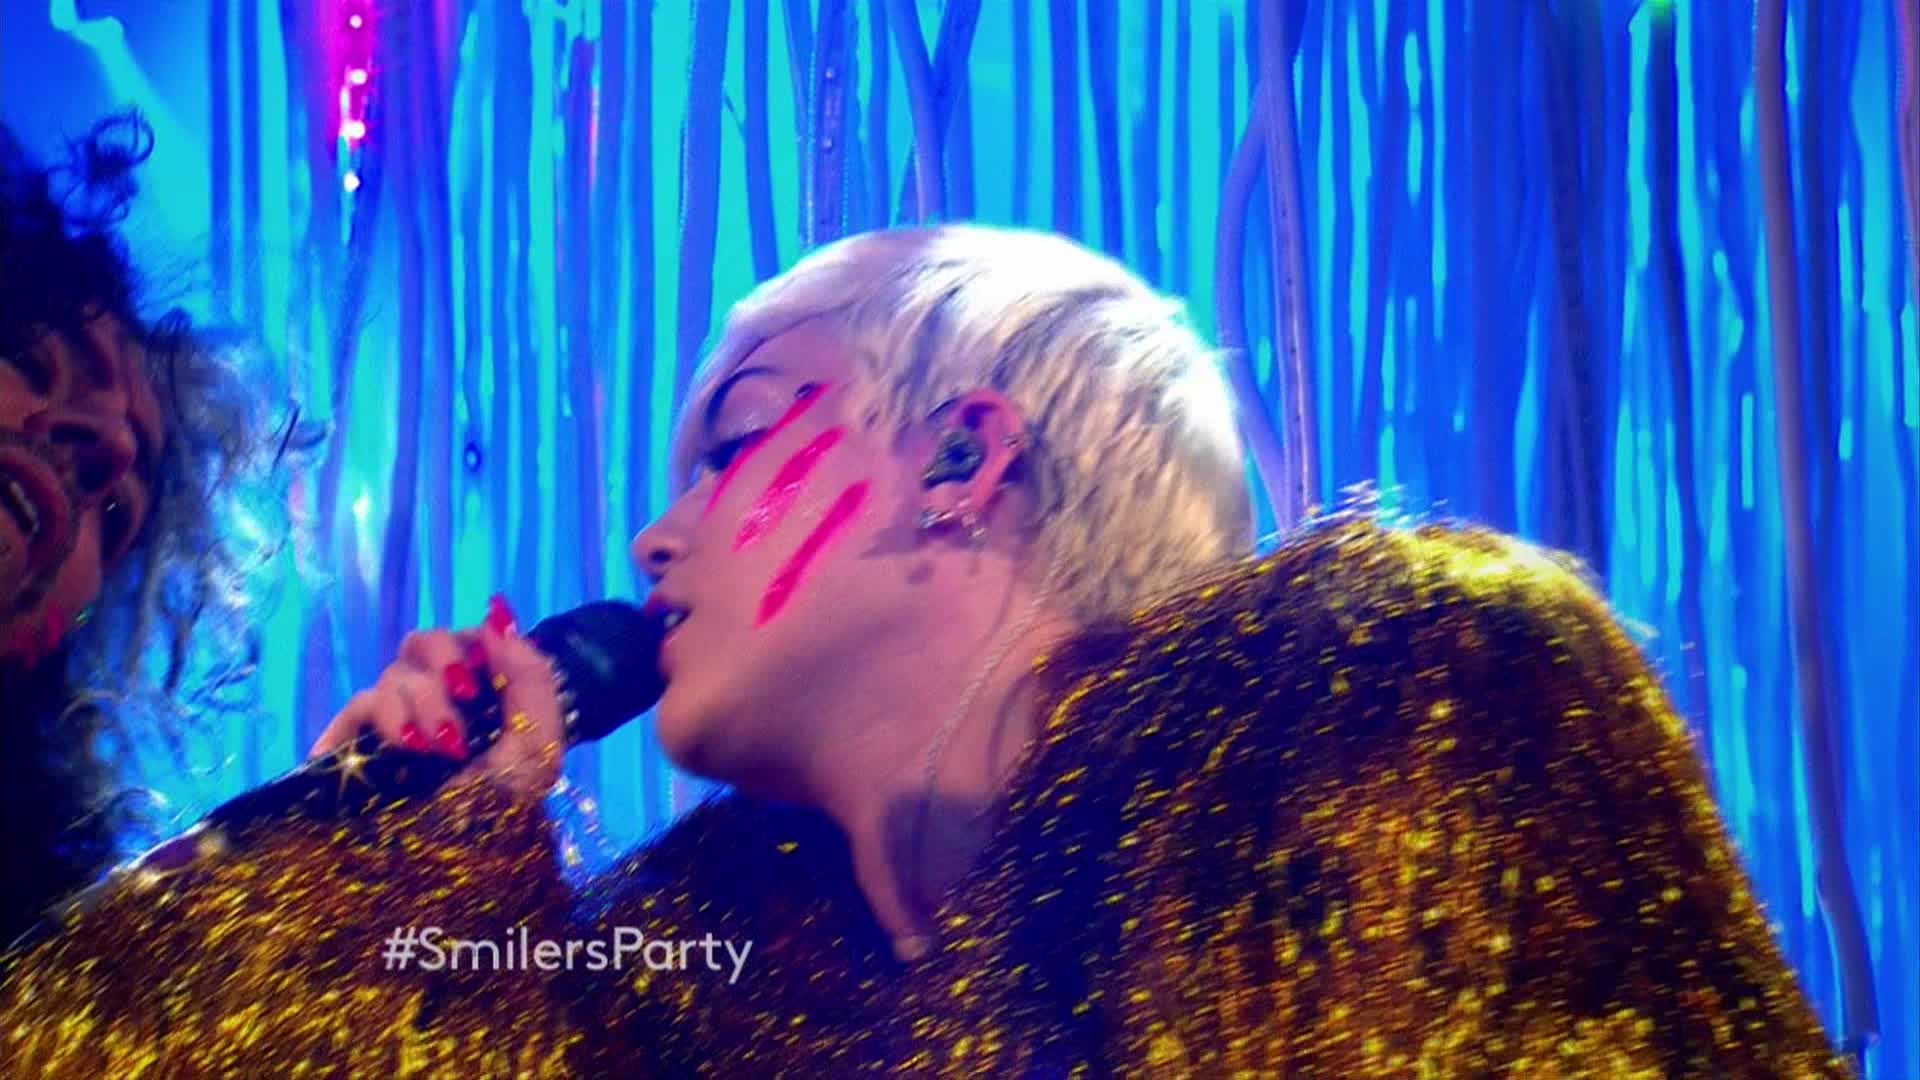 Miley Cyrus [ft The Flaming Lips] - 2014-05-18, Billboard Music Awards - 1080 TS - LSD preview 1